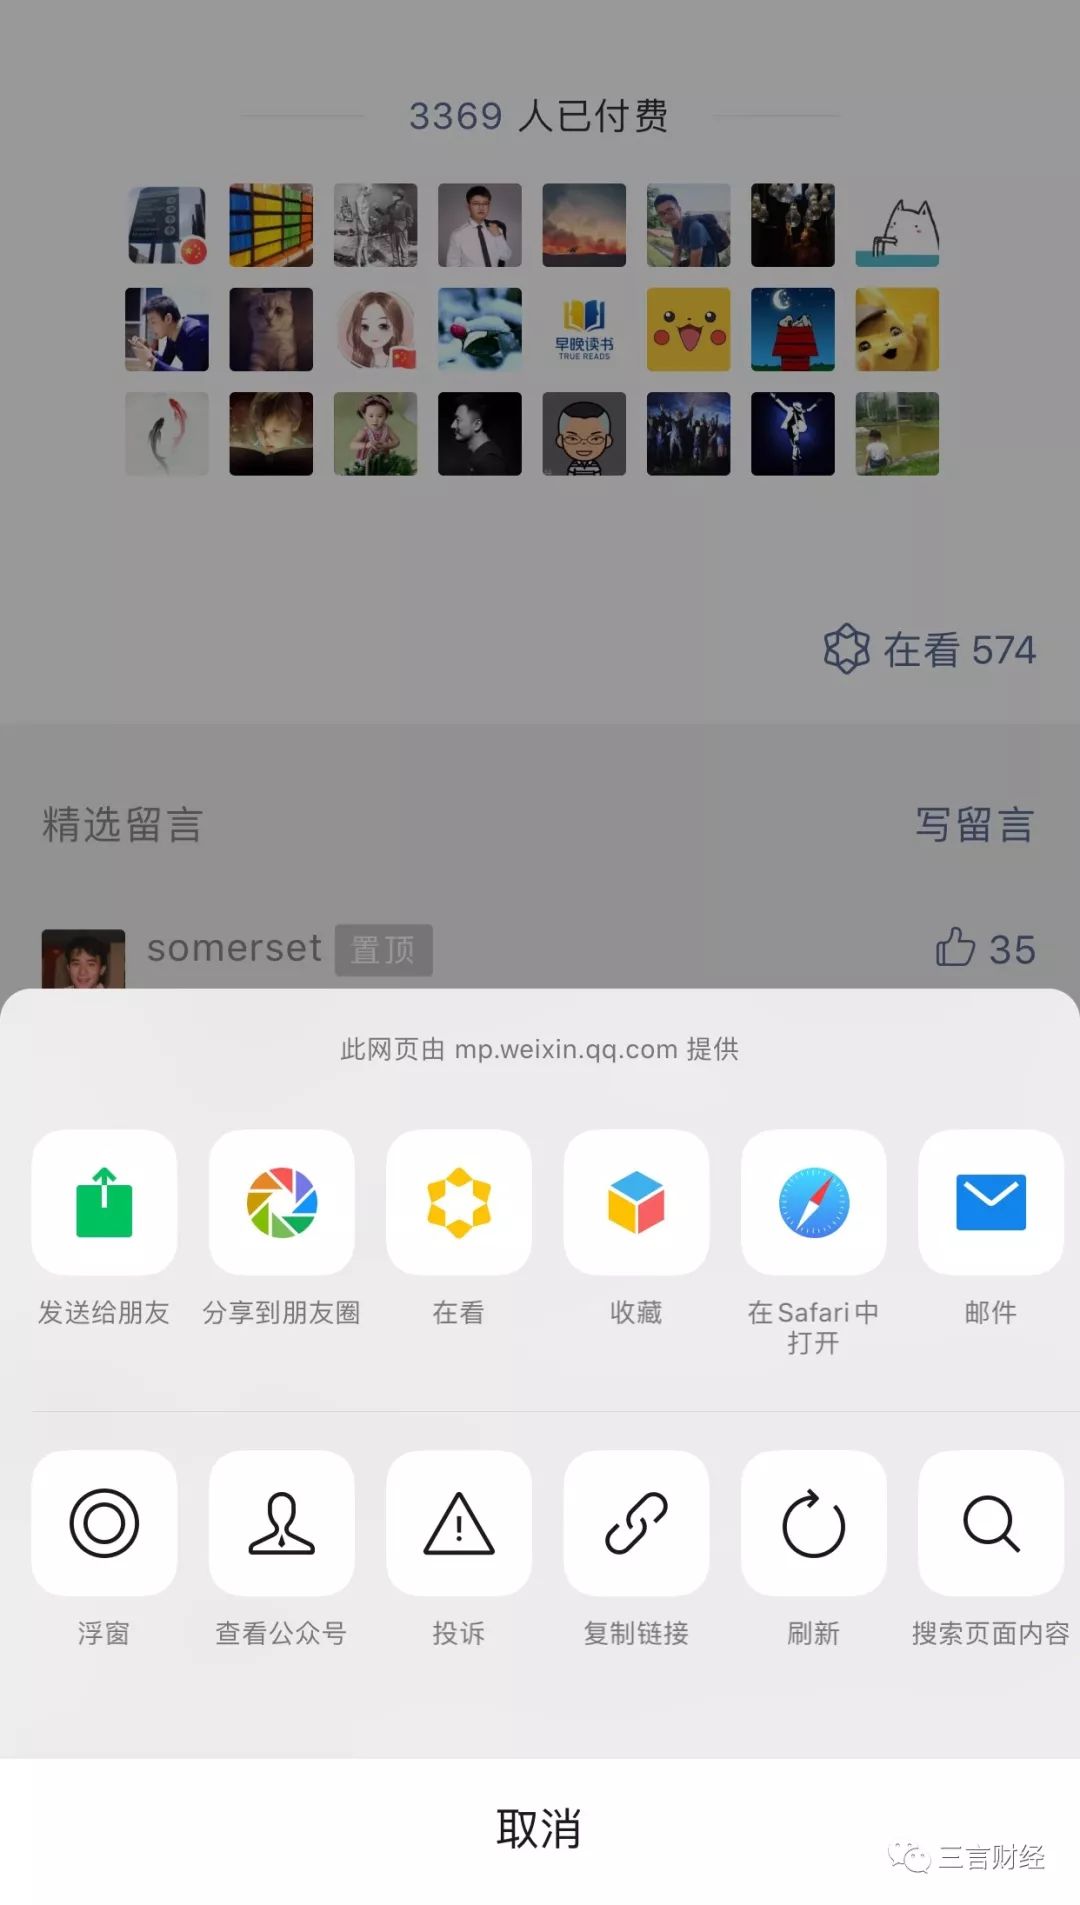 WeChat paid reading looks like this: no reading is displayed, you can leave a message after paying